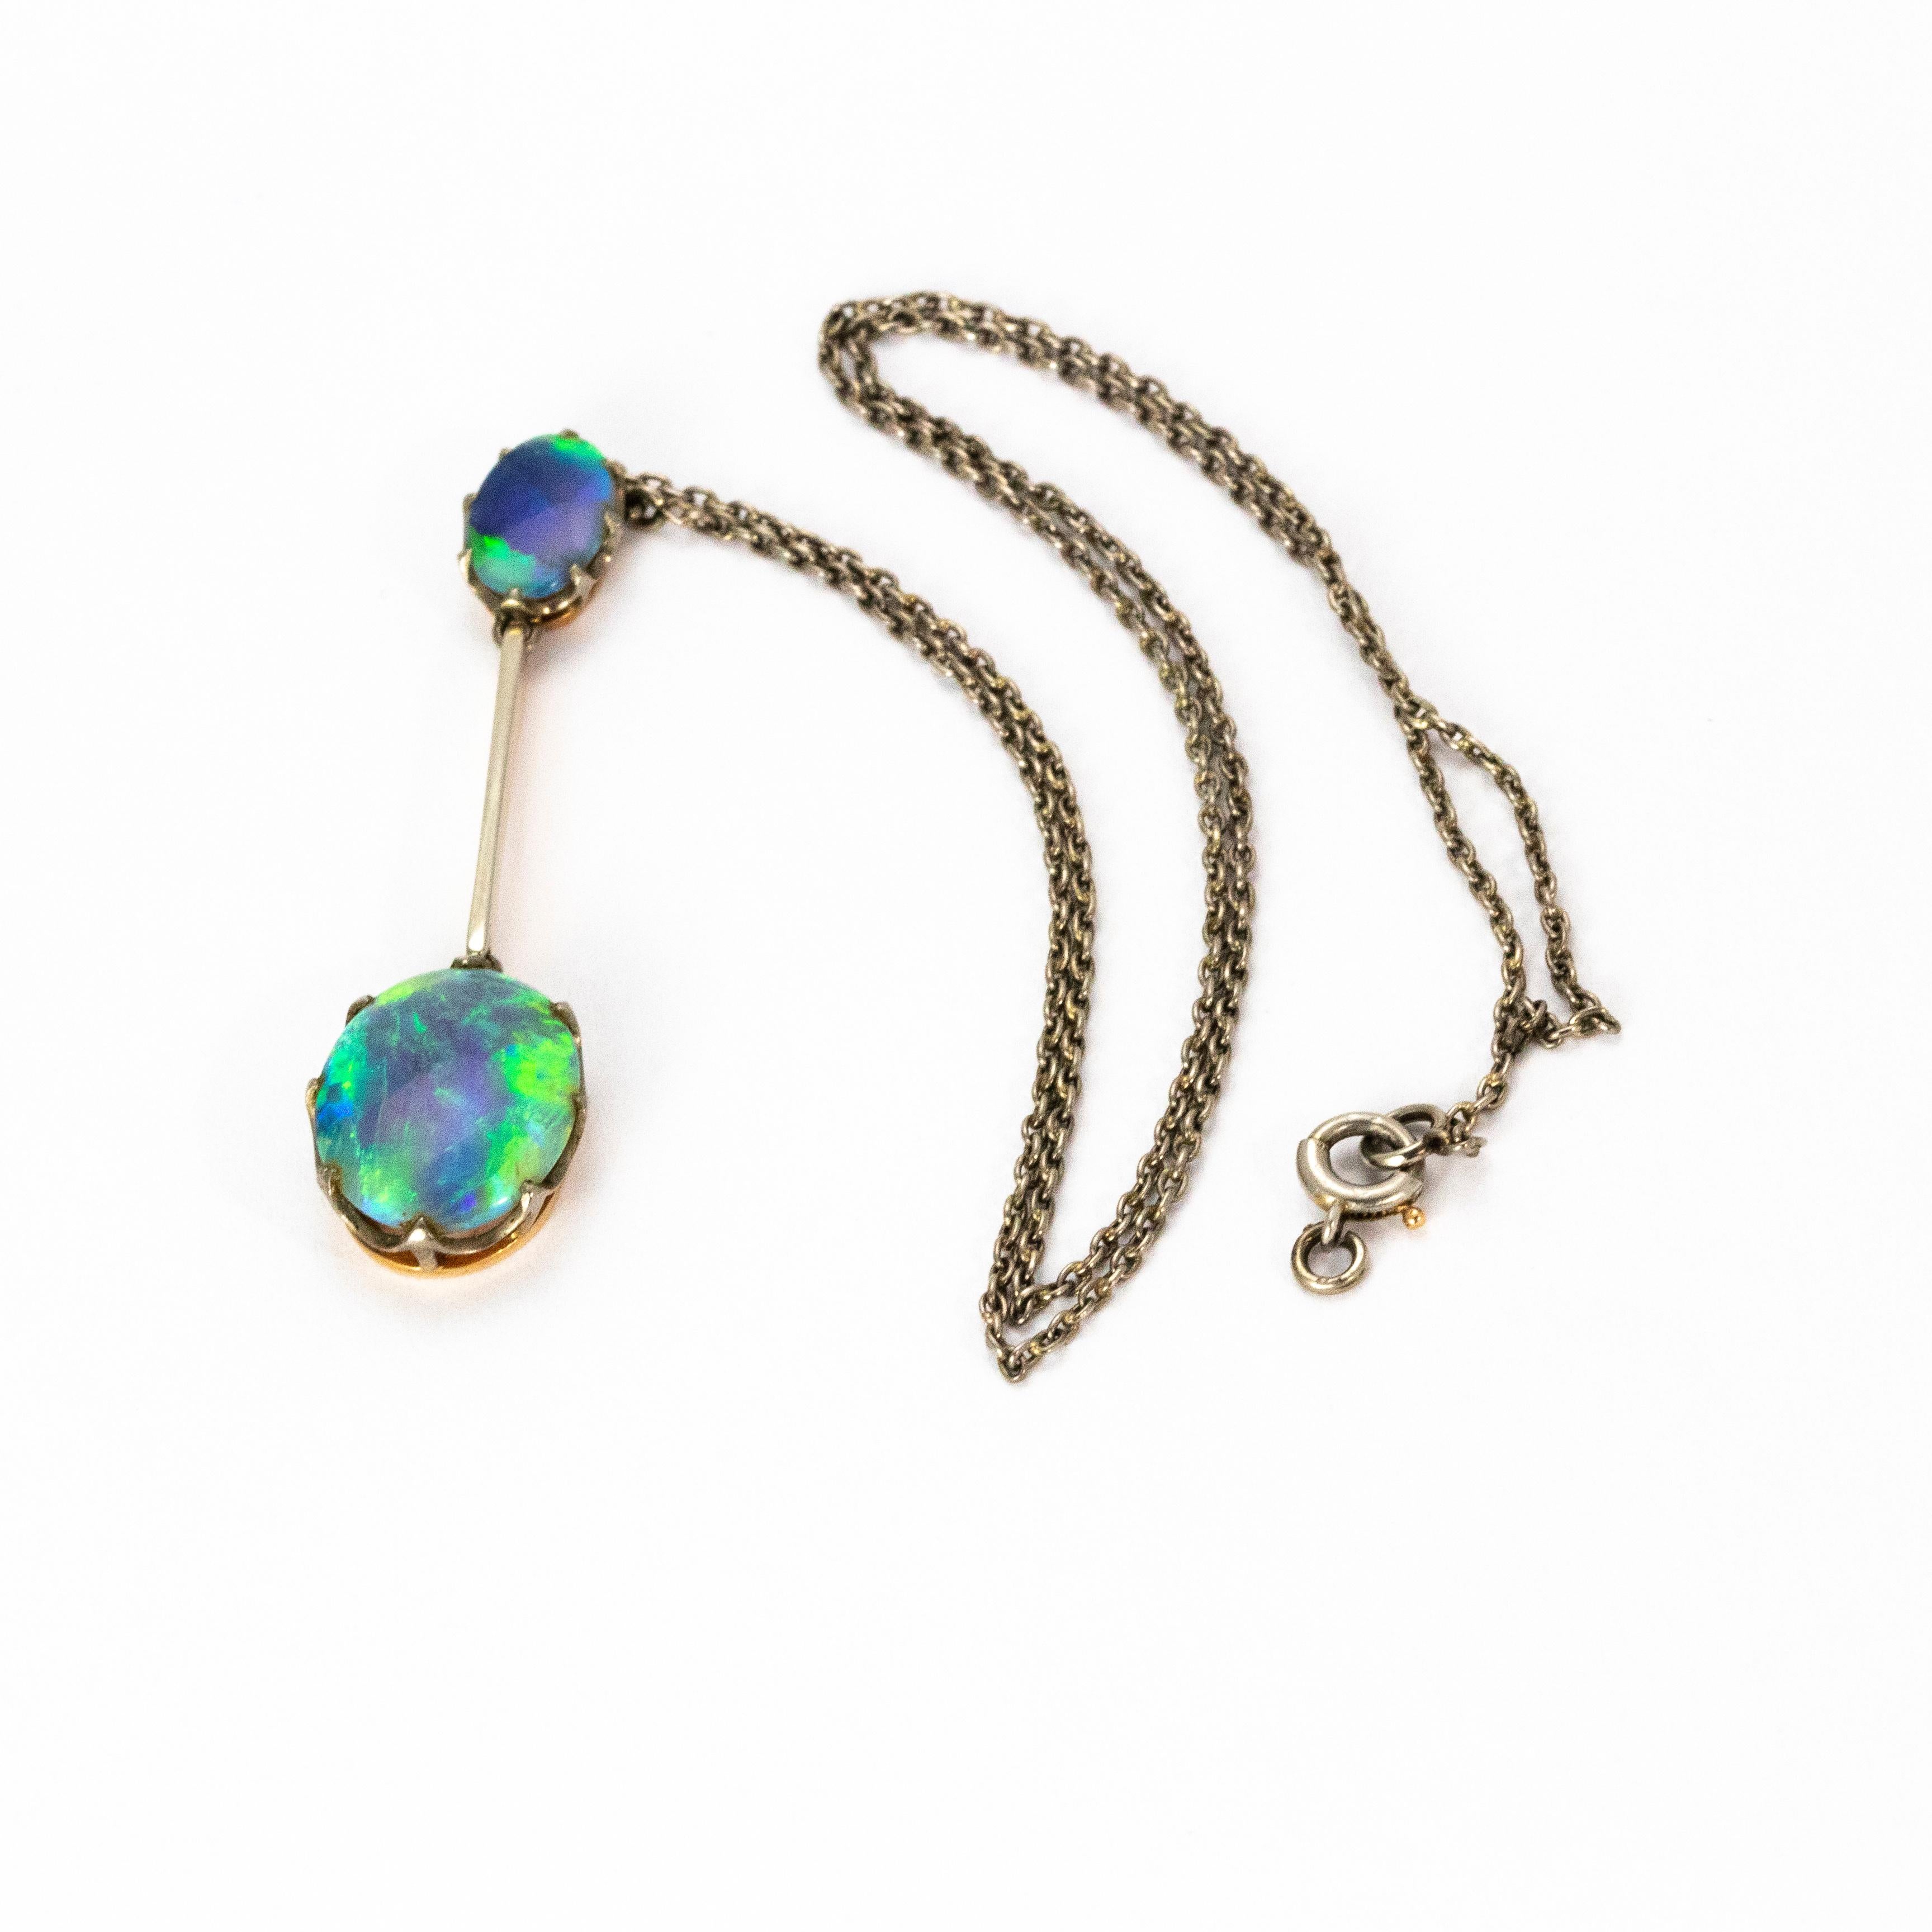 A simply stunning Art Deco pendant necklace. The pendant boasts two black opals which effervesce with colour. The smaller opal measures 2 carats, and the larger drop opal measures an impressive 9 carats. The wonderful stones are set in platinum and